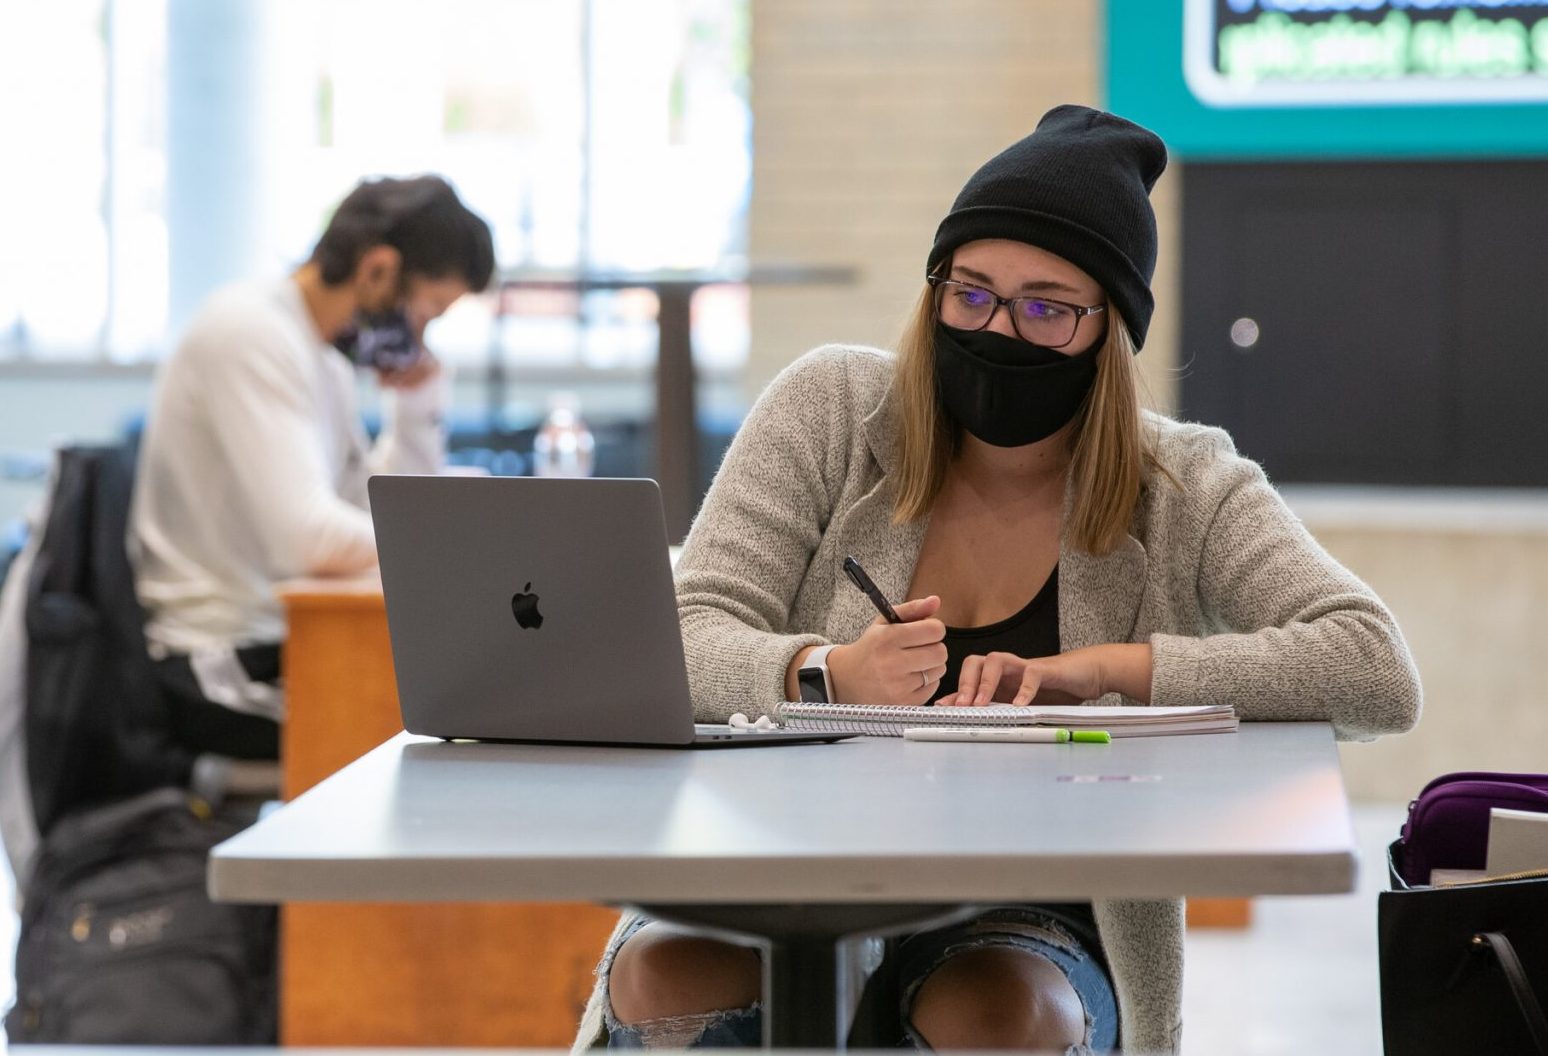 Students Studying in MUSC with Masks